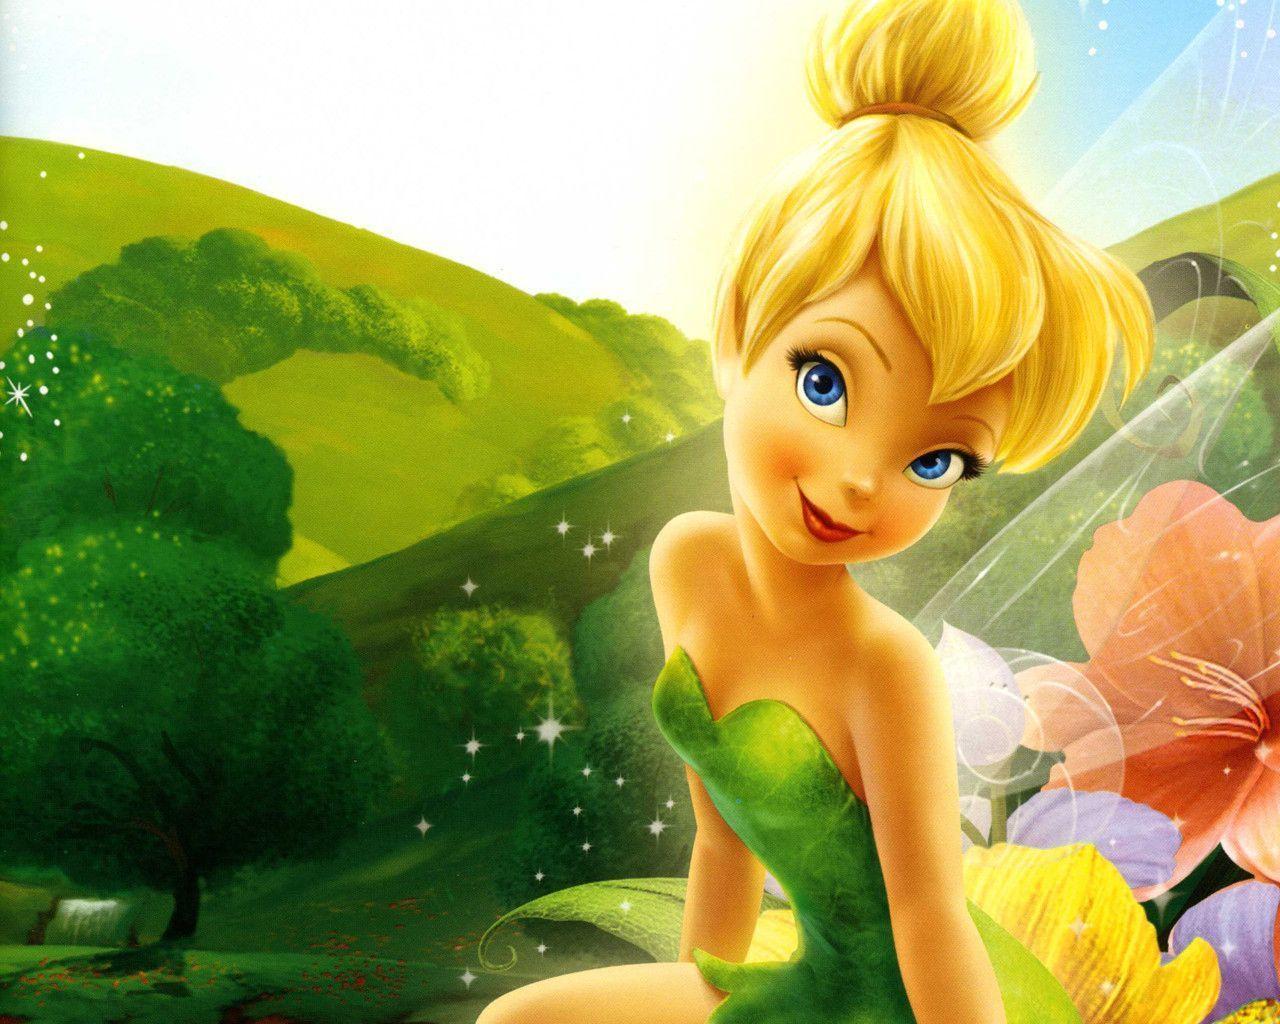 Find yourself a great Tinkerbell wallpapers with the Disney fairies